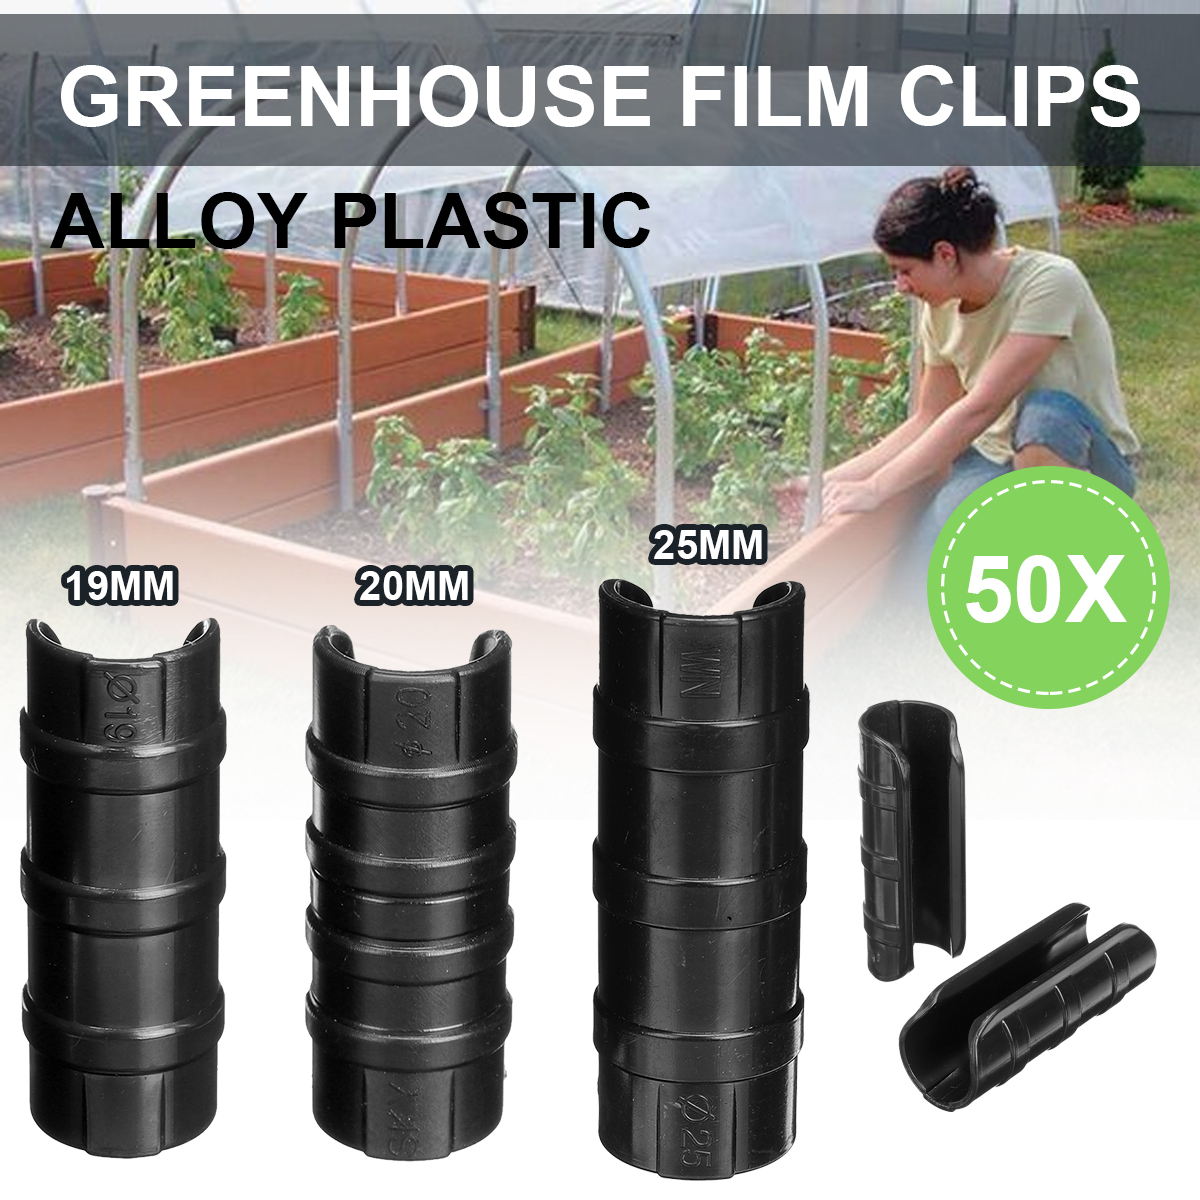 50pcs-192025MM-Garden-Buildings-Tube-Clip-Greenhouse-Frame-Pipe-Tube-Film-Clip-Clamp-Connector-Kit-A-1705114-1